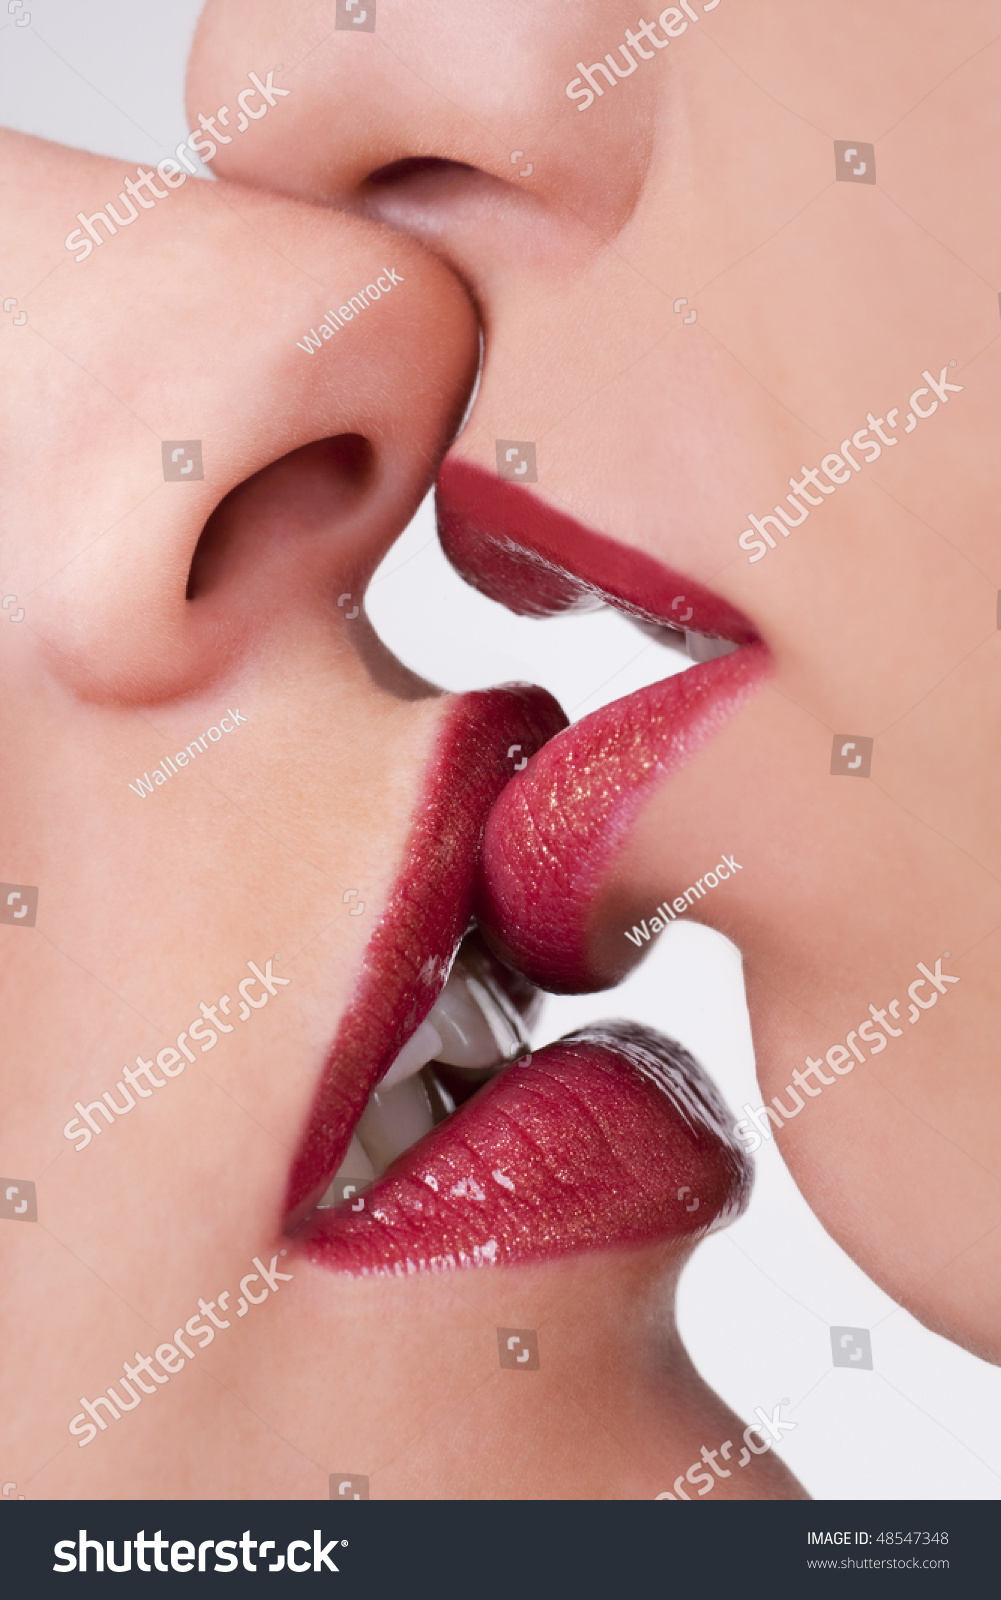 girls kissing with tongue